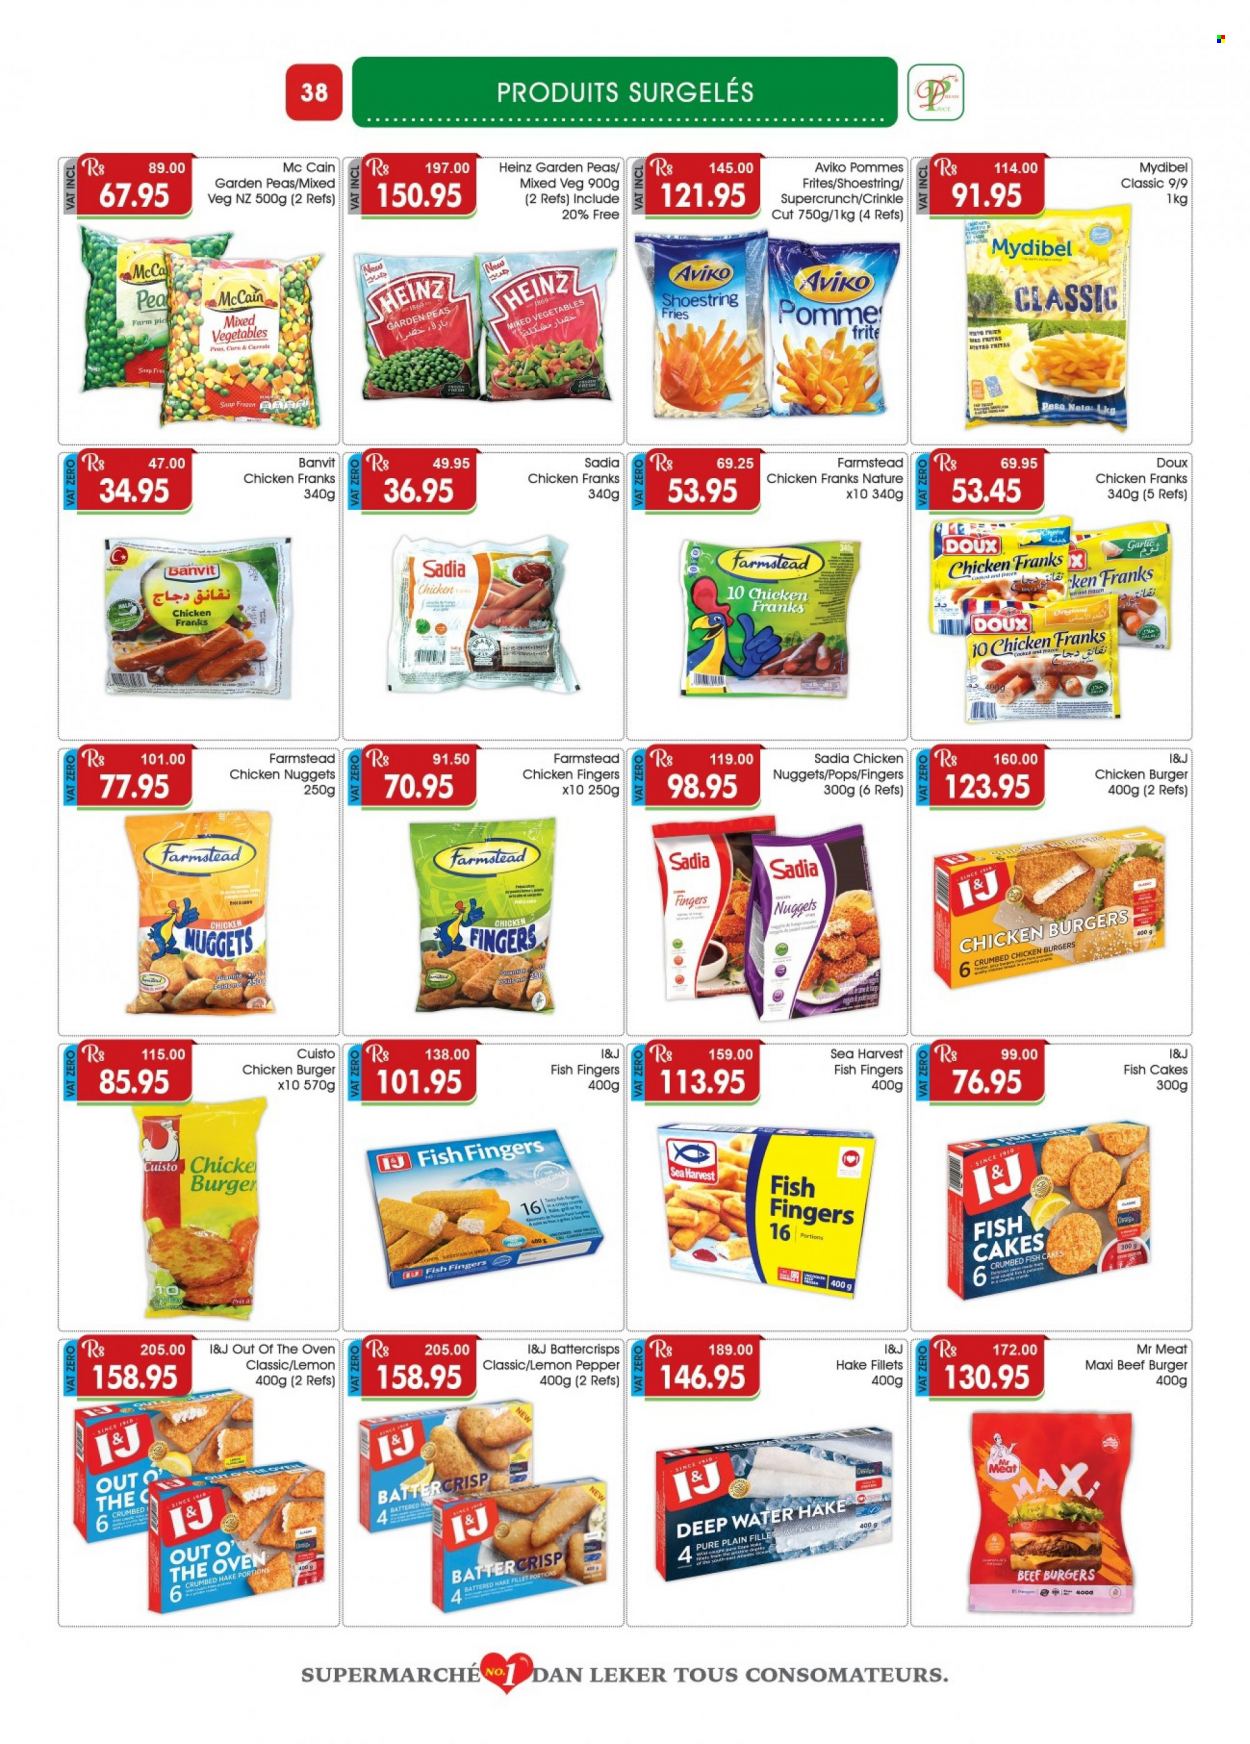 thumbnail - Dreamprice Catalogue - 17.09.2022 - 11.10.2022 - Sales products - garlic, hake, fish, crumbed fish, fish fingers, Sea Harvest, fish sticks, nuggets, hamburger, chicken nuggets, beef burger, Out o' the Oven, chicken frankfurters, mixed vegetables, McCain, potato fries, fish cake, cage, Heinz. Page 38.